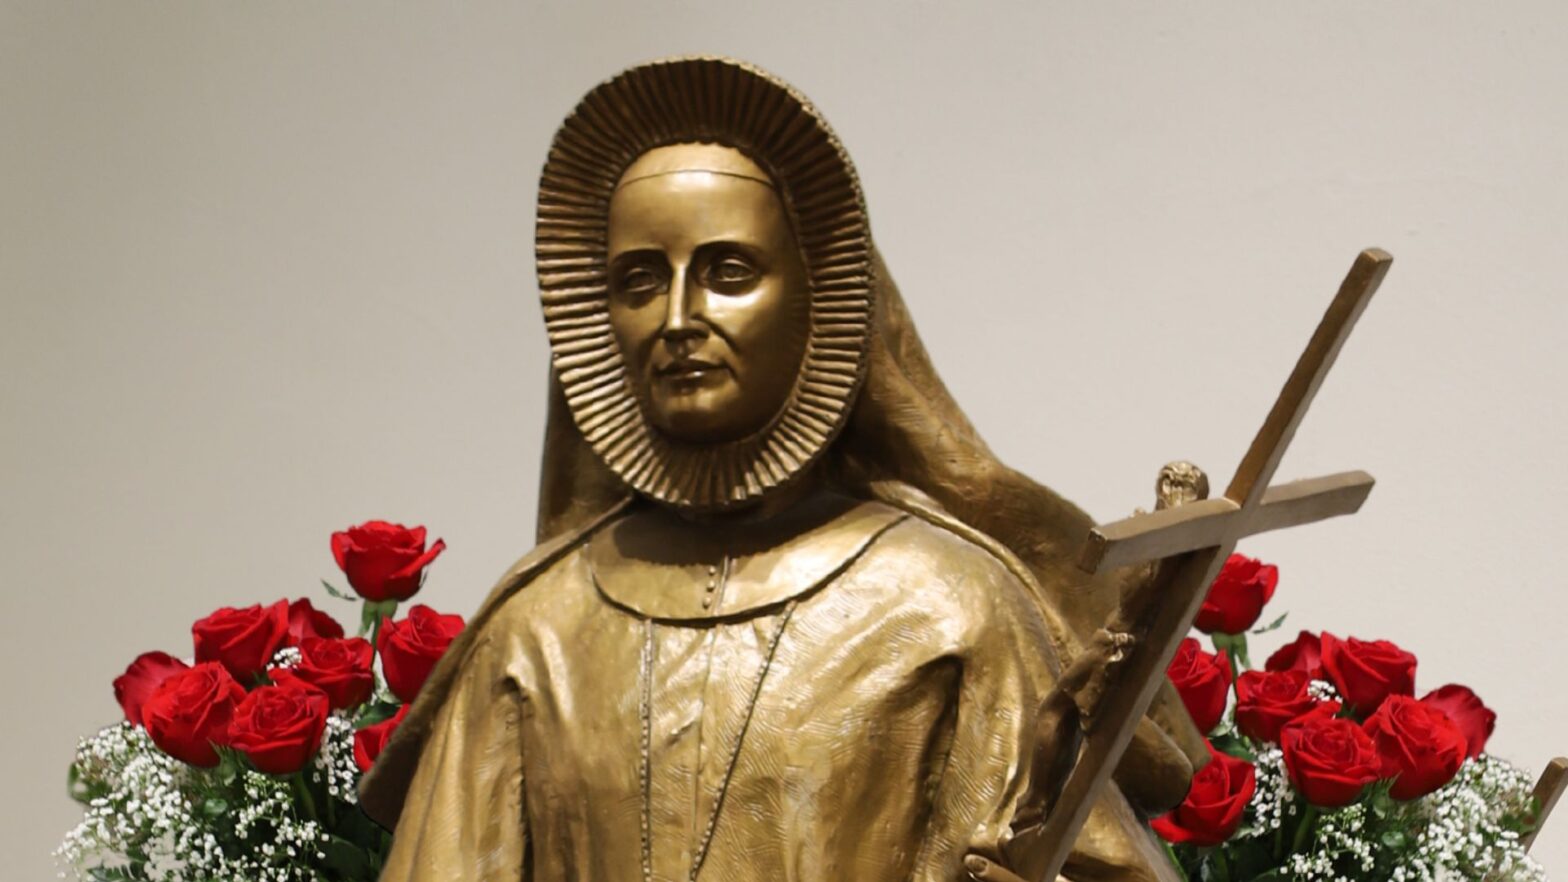 St. Maria De Mattias sculpture with red roses in the background.